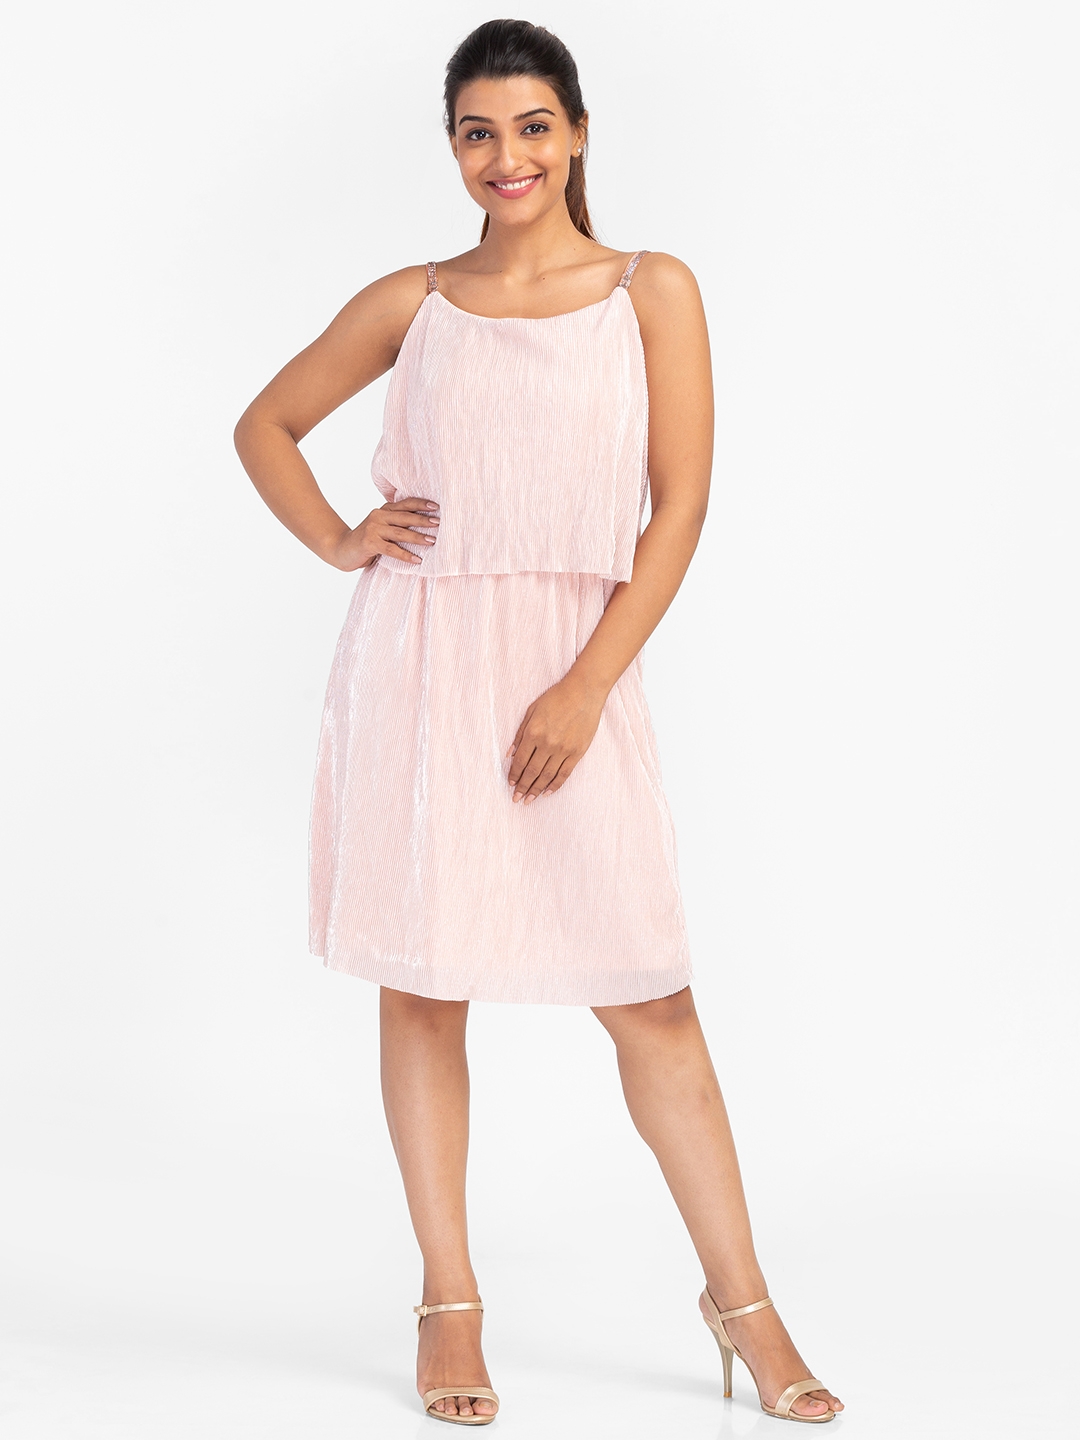 globus | Globus Pink Self Design Fit and Flare Party Dress